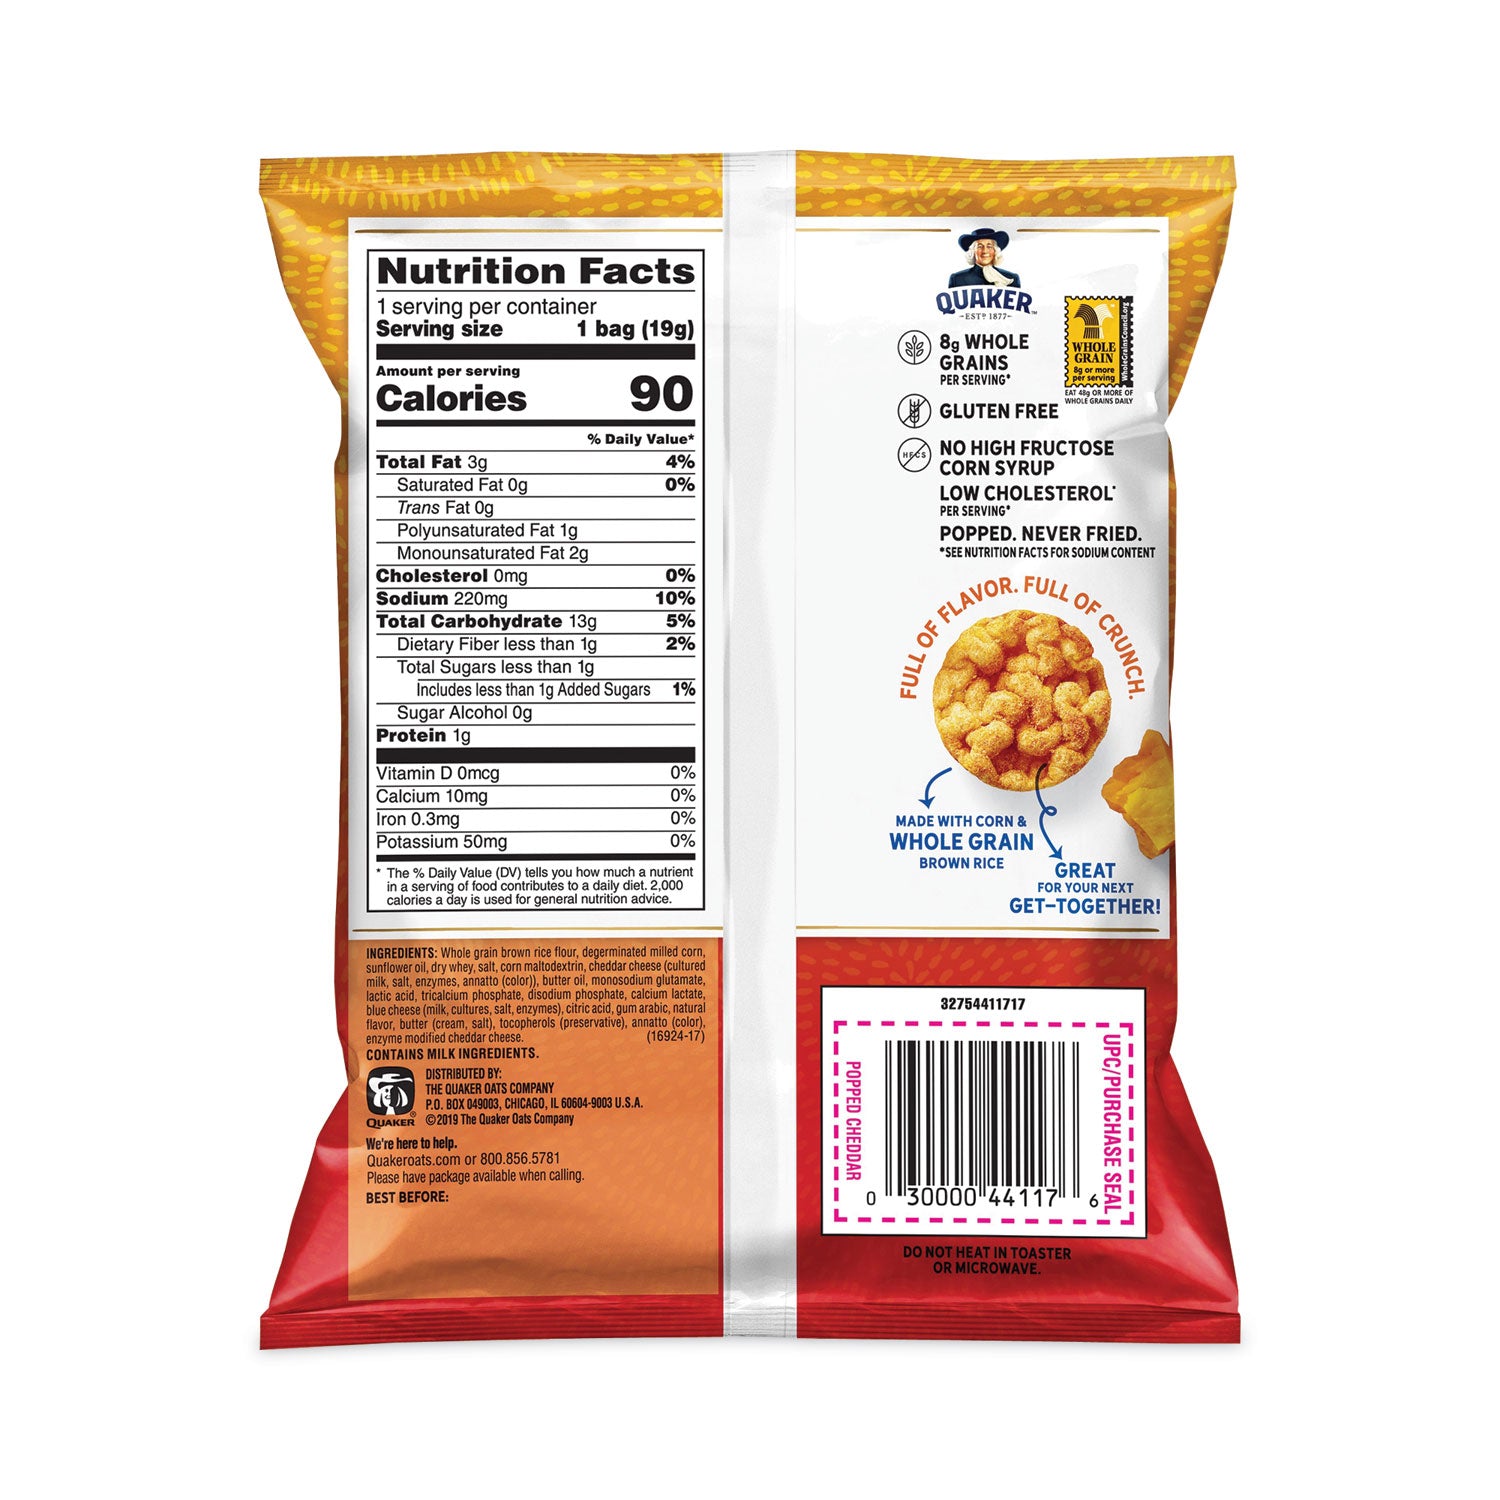 rice-crisps-cheddar-cheese-067-oz-bag-60-bags-carton-ships-in-1-3-business-days_grr29500051 - 2